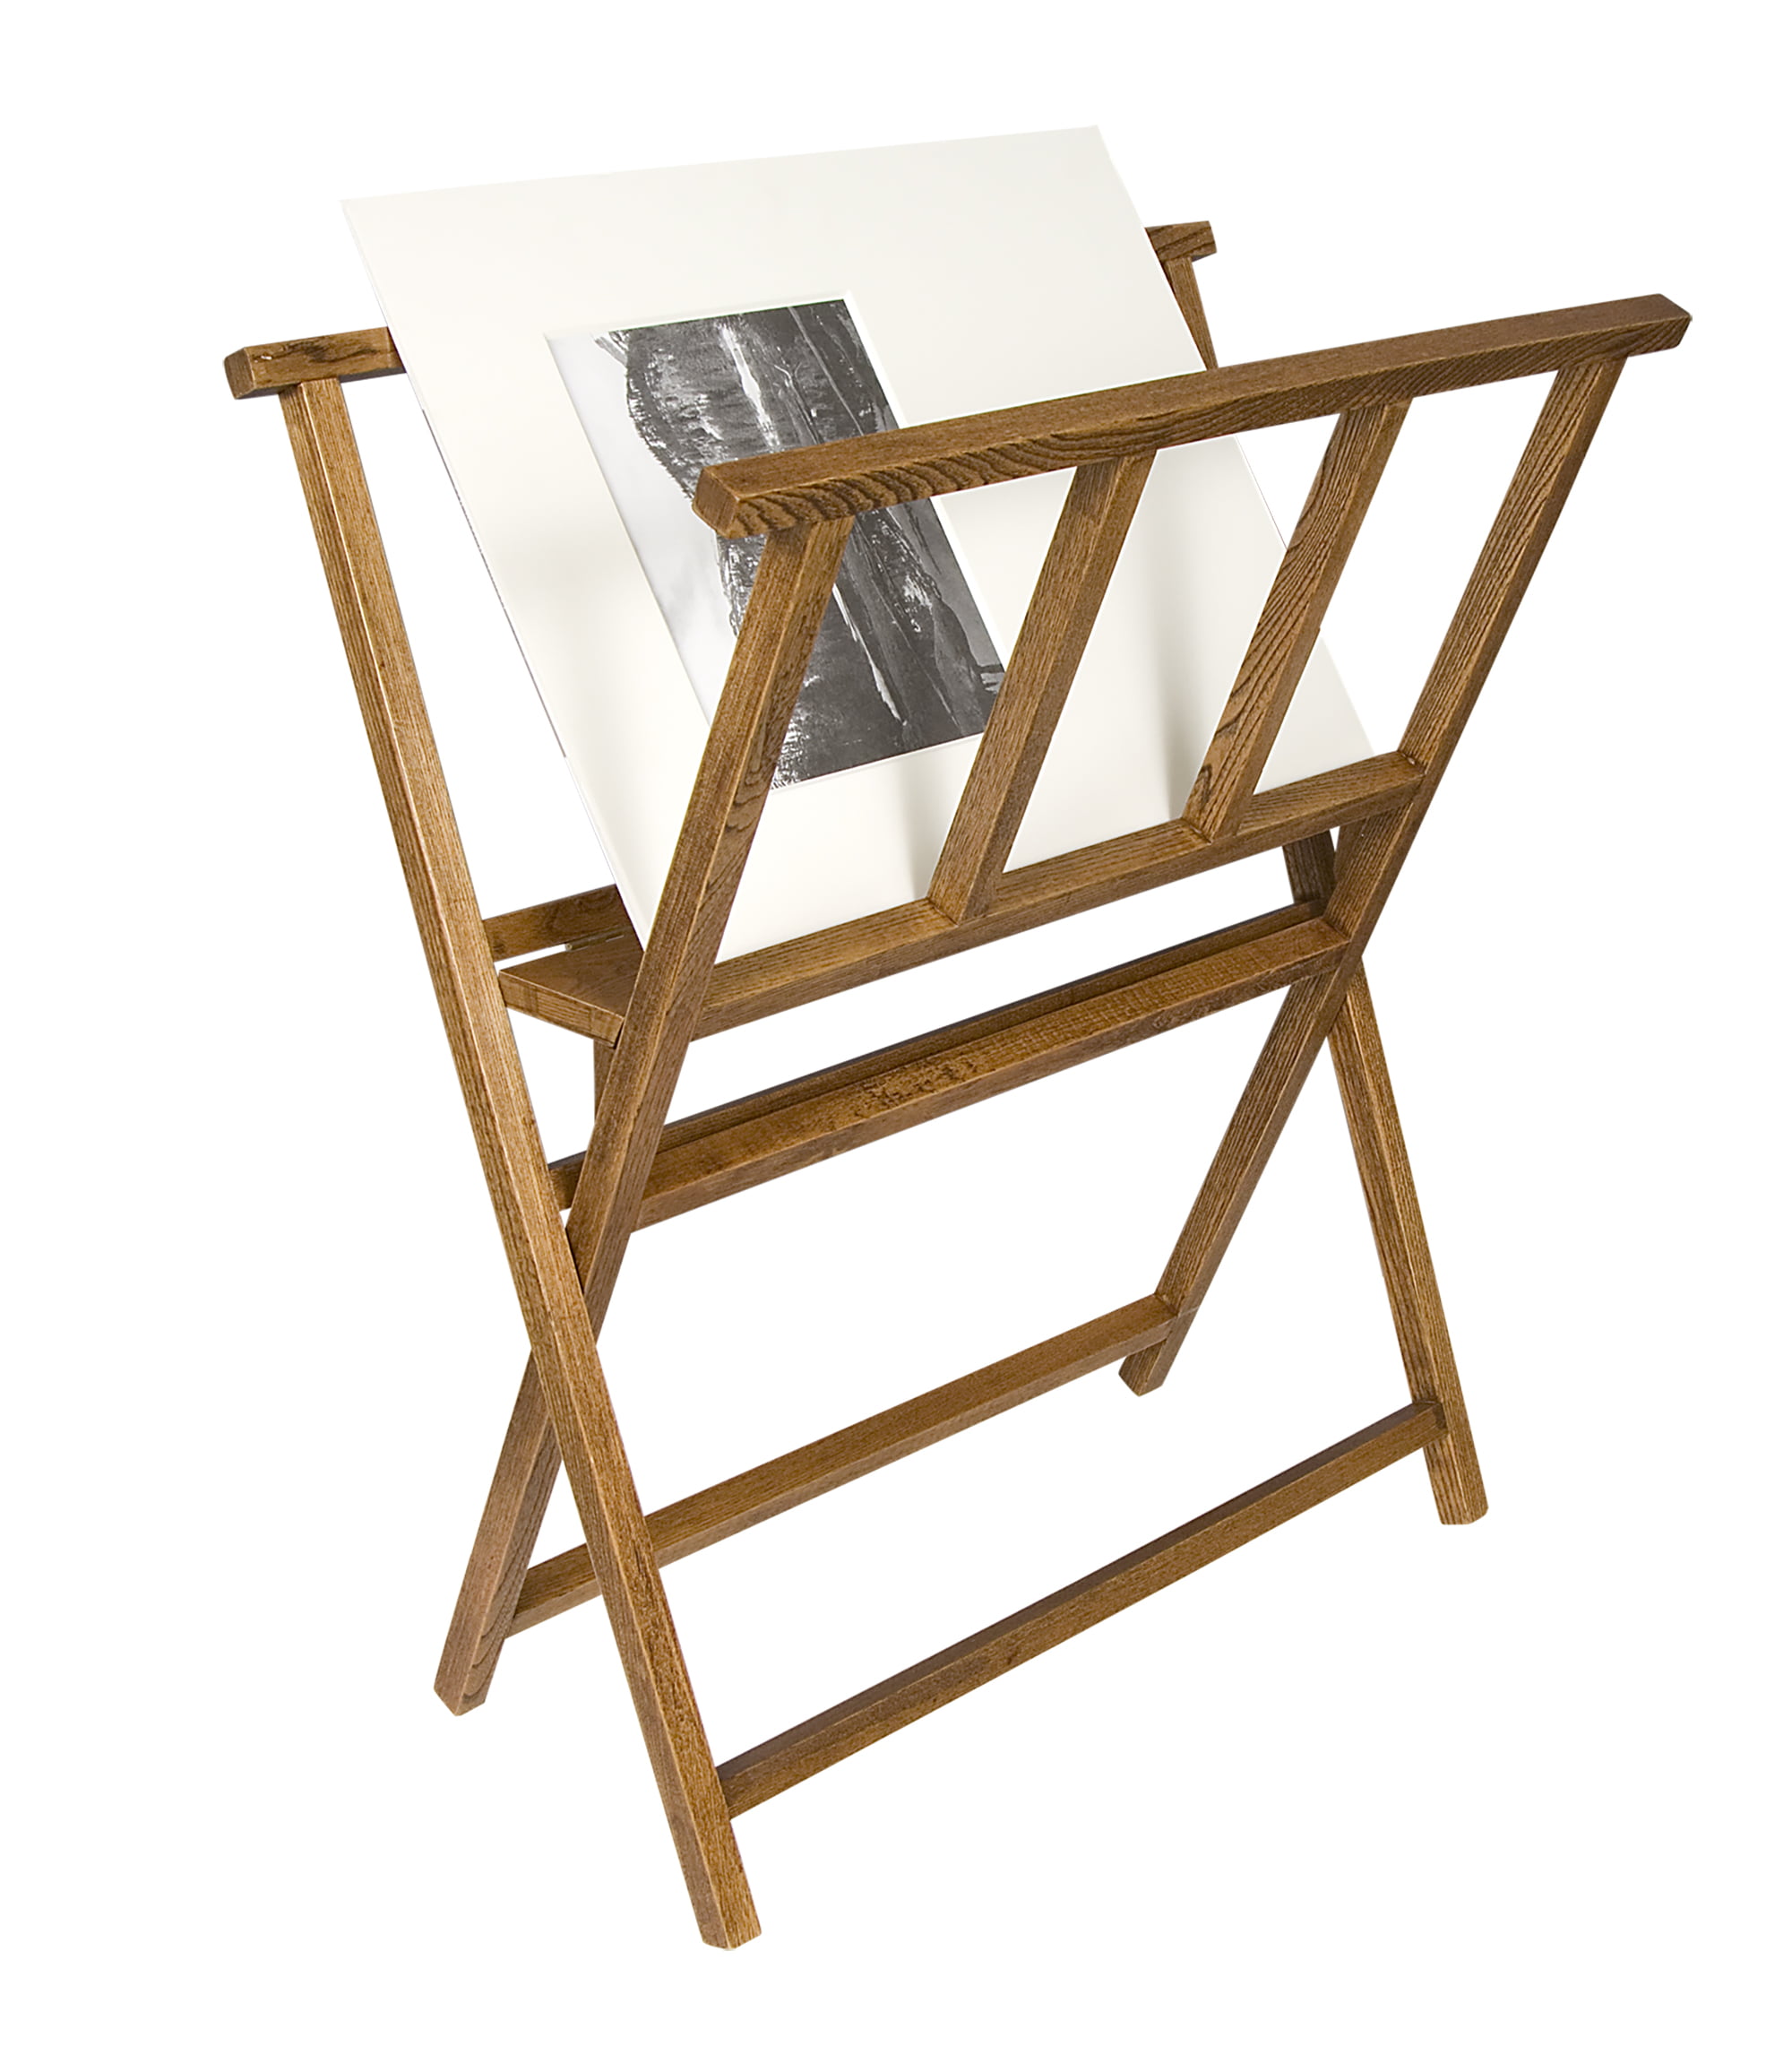  VISWIN Extra-Large Wood Print Rack, Art Display Rack with  Rolling Casters, 7 Adjustable Heights, Perfect for Storage & Display for  Canvas, Artwork, Prints, Panels, Posters, Art Shows & Galleries